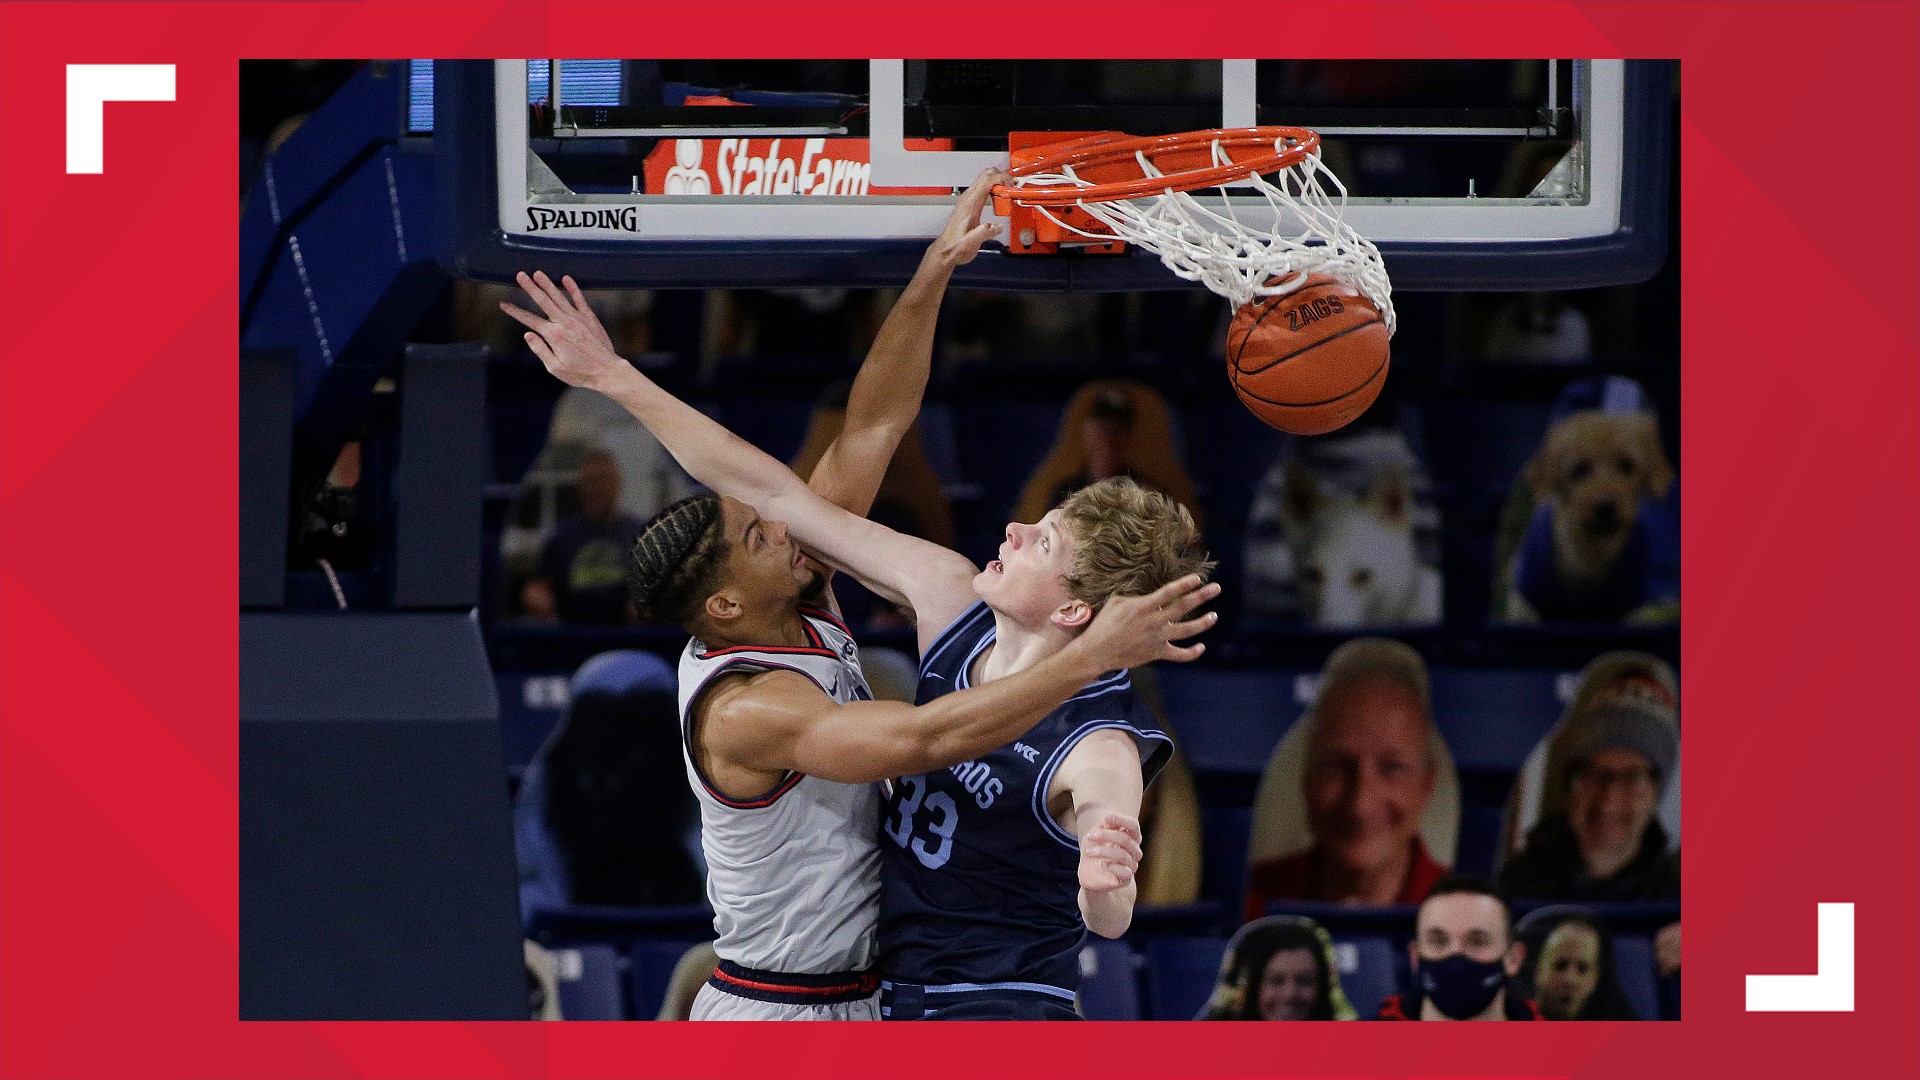 Drew Timme scored 21 points as No. 1 Gonzaga beat San Diego 106-69 on Saturday night, extending the nation’s longest winning streak to 26 games.